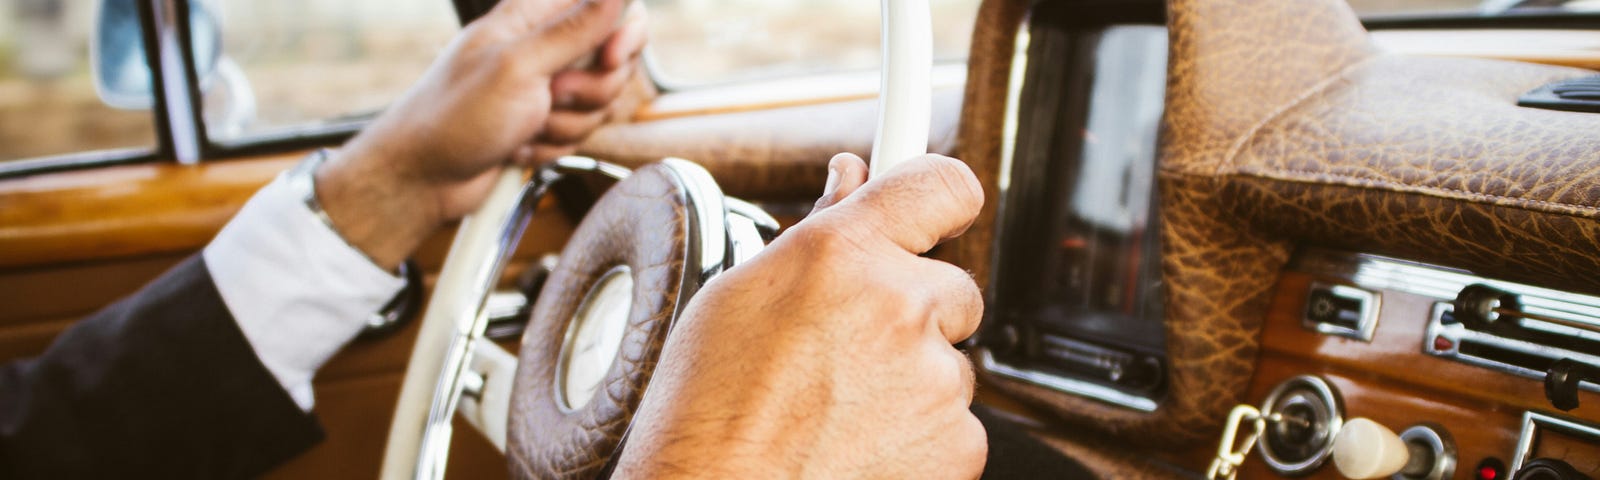 Man in a suit and dress shirt, grips the steering wheel of an old classic car, key in the ignition.